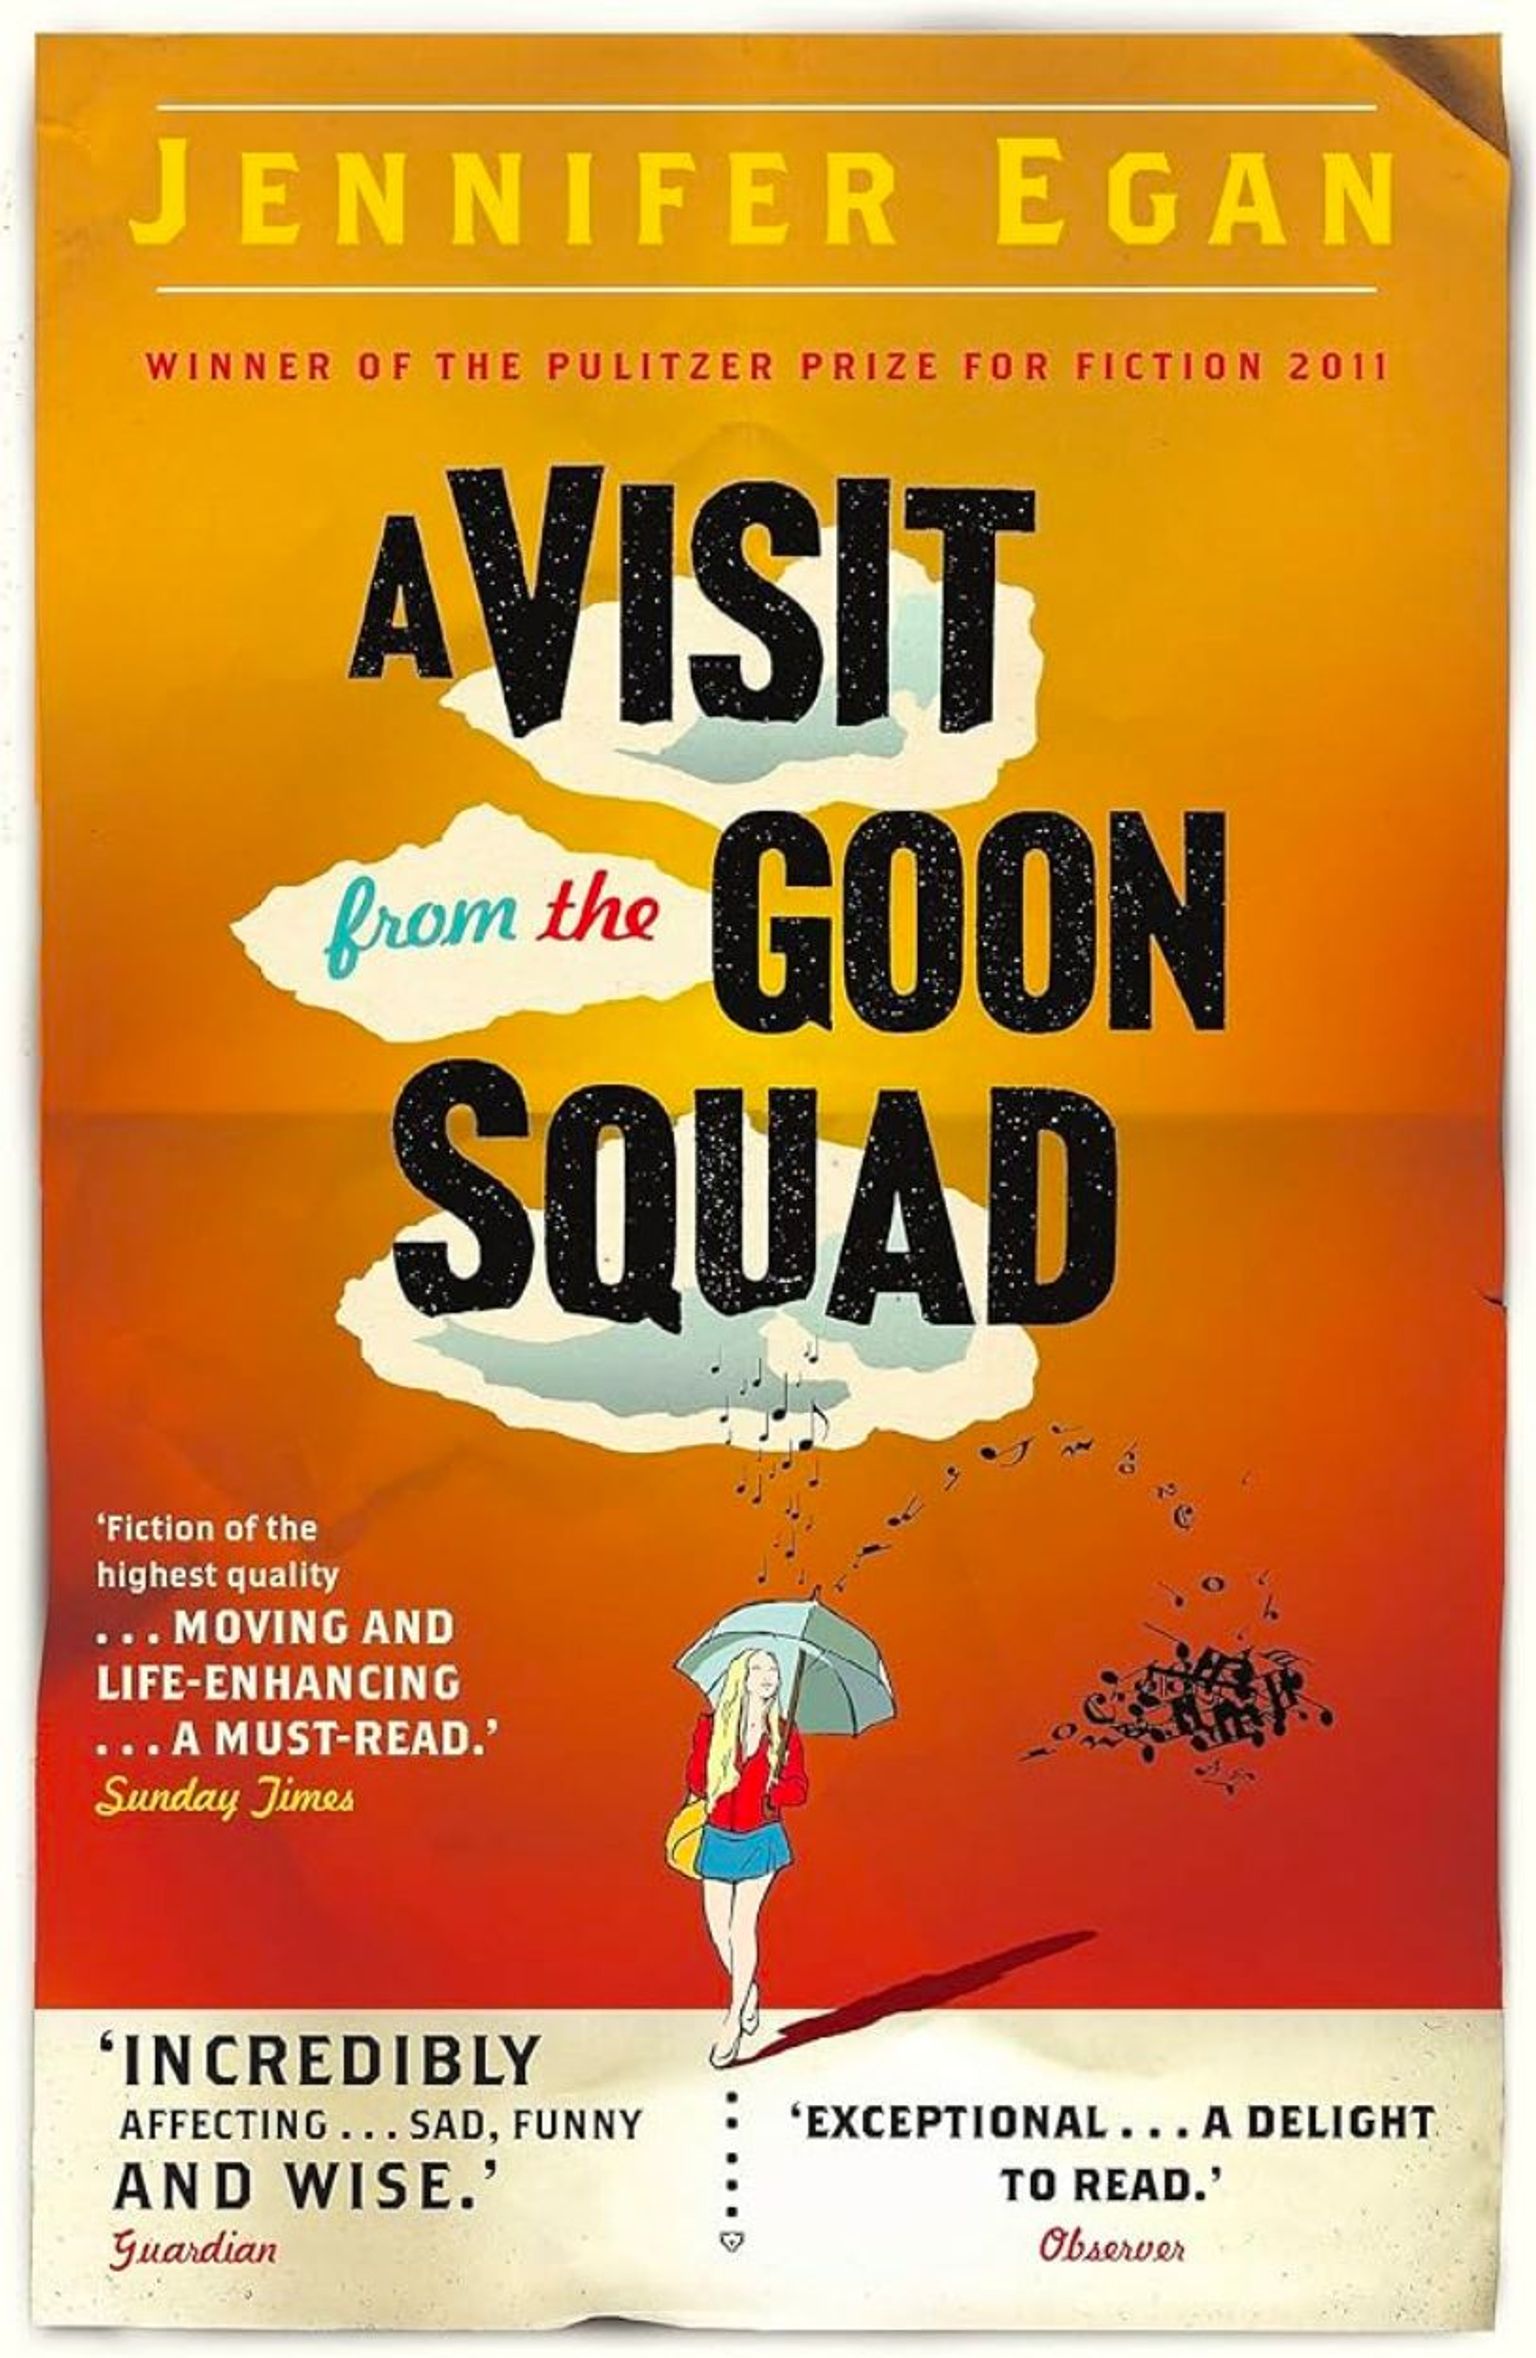 Book Recommendations - Visit from the Goon Squad